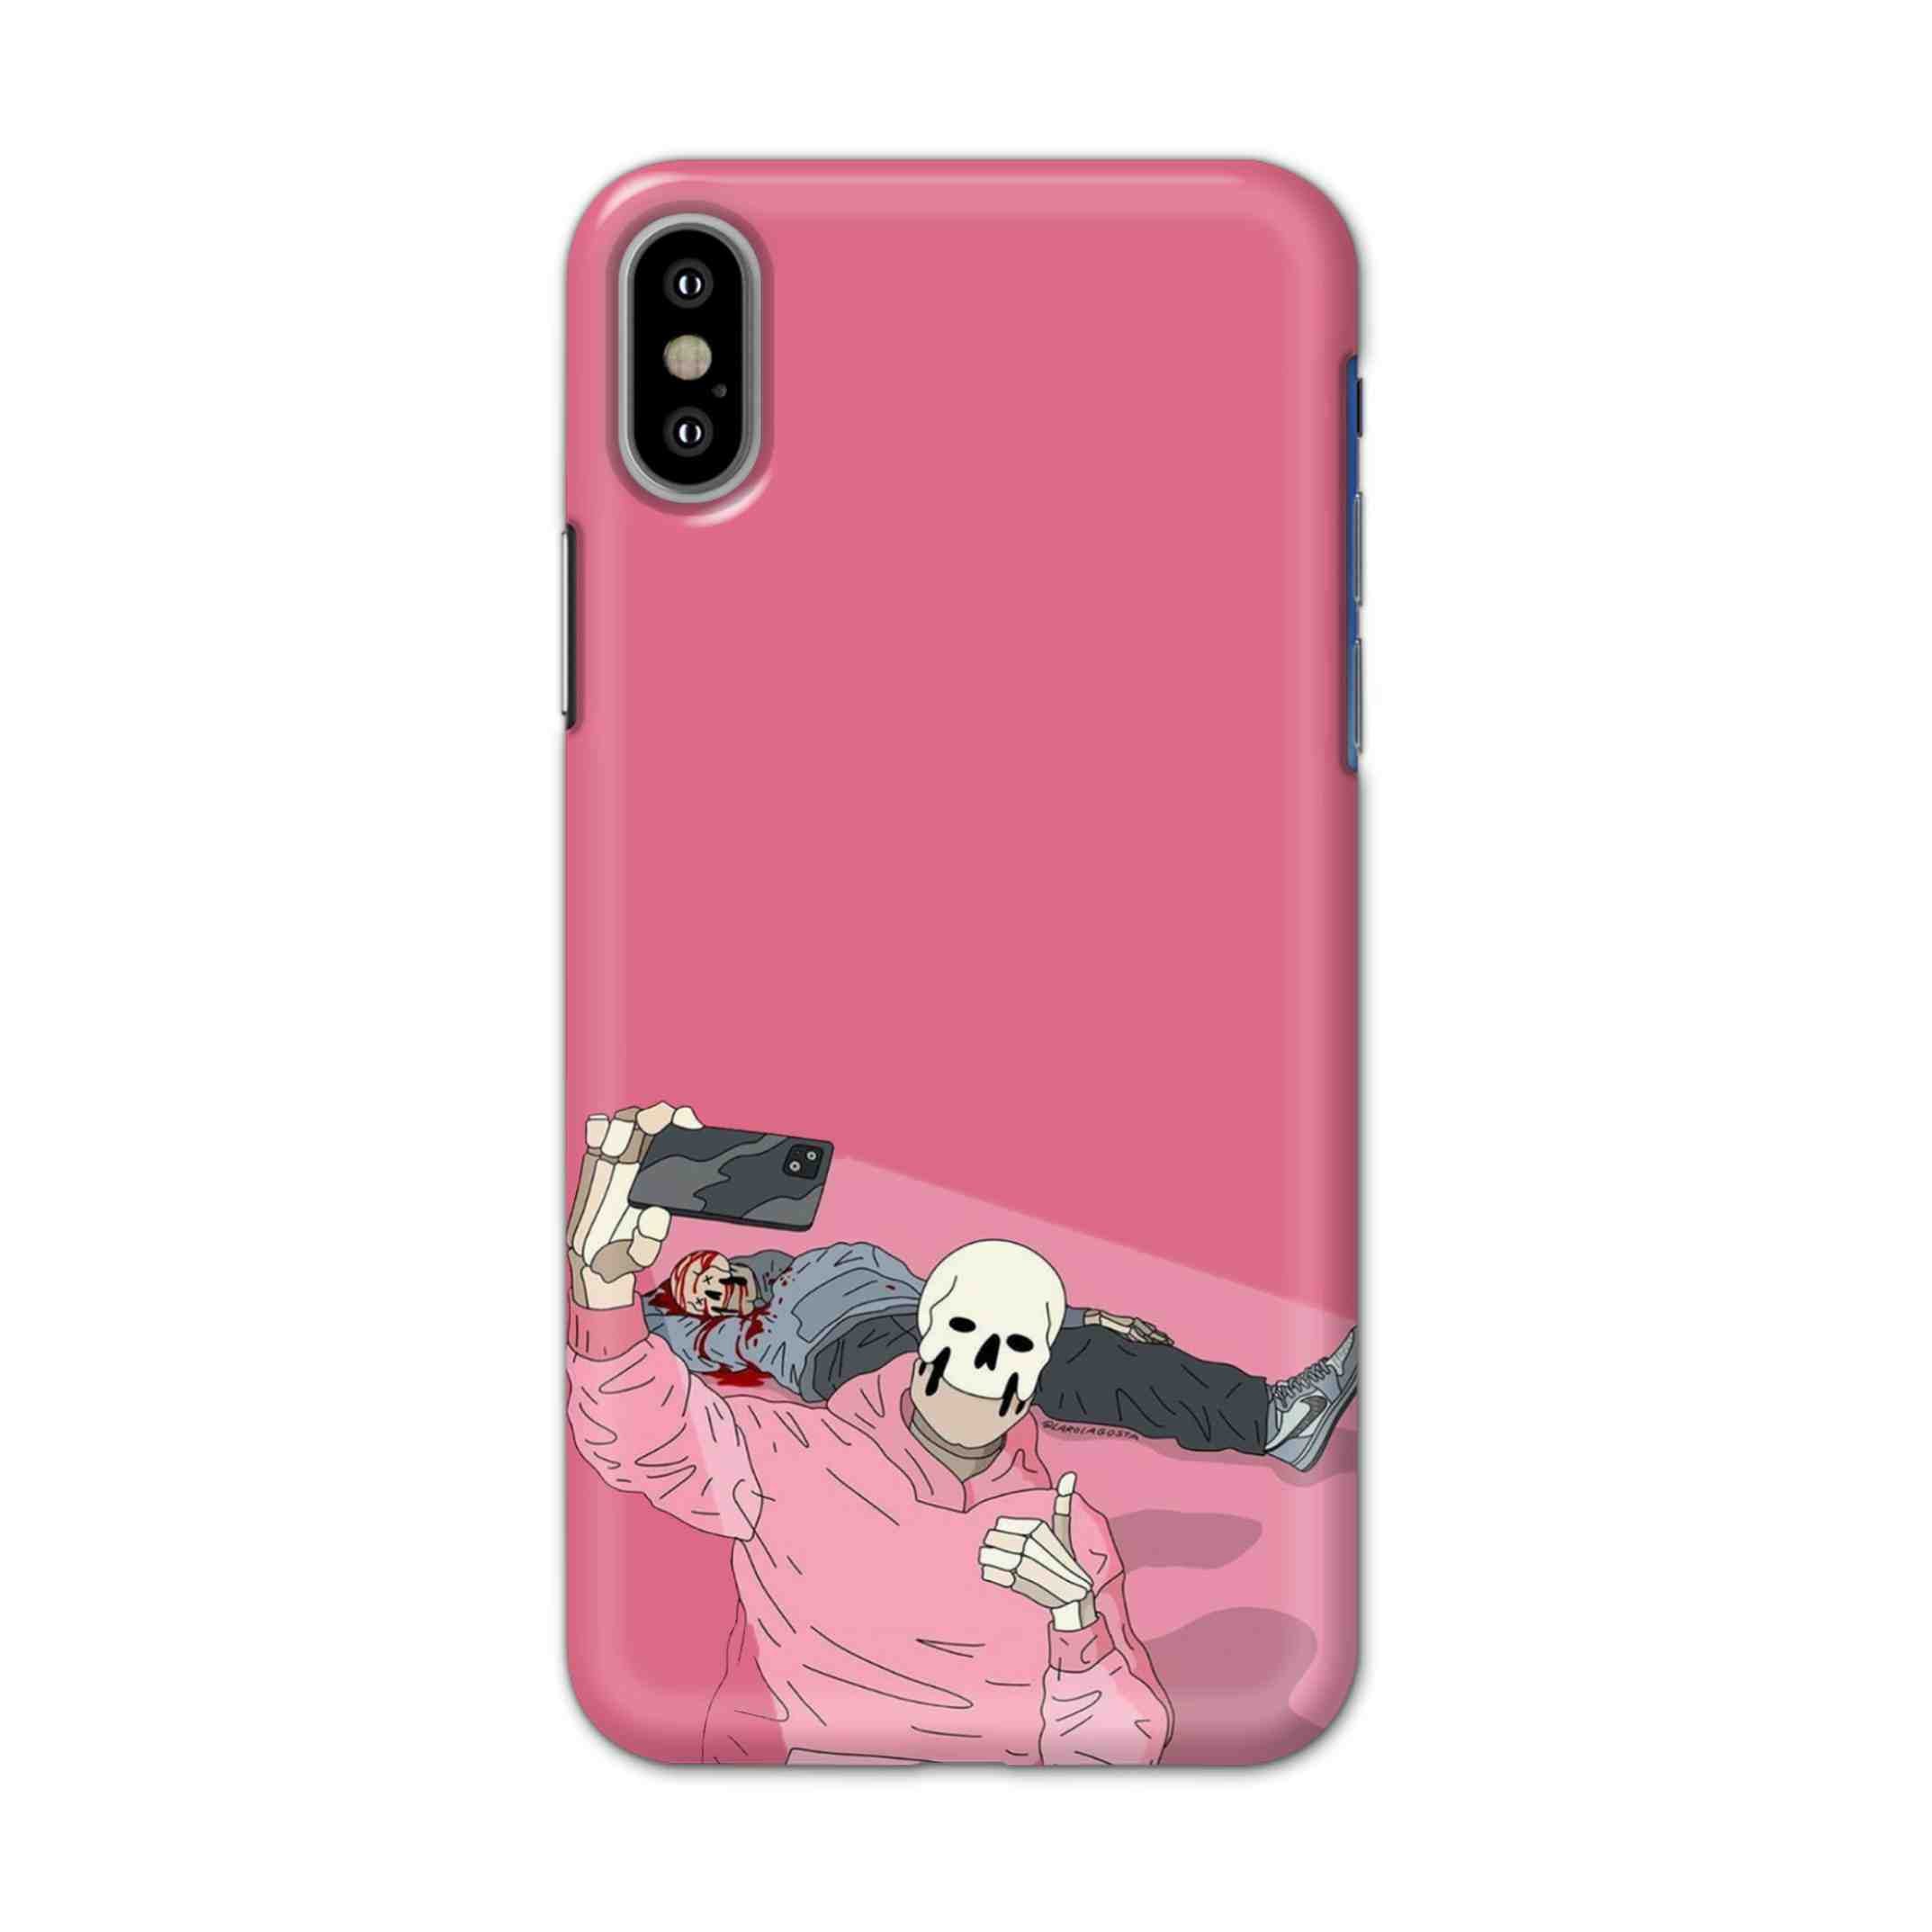 Buy Selfie Hard Back Mobile Phone Case/Cover For iPhone X Online